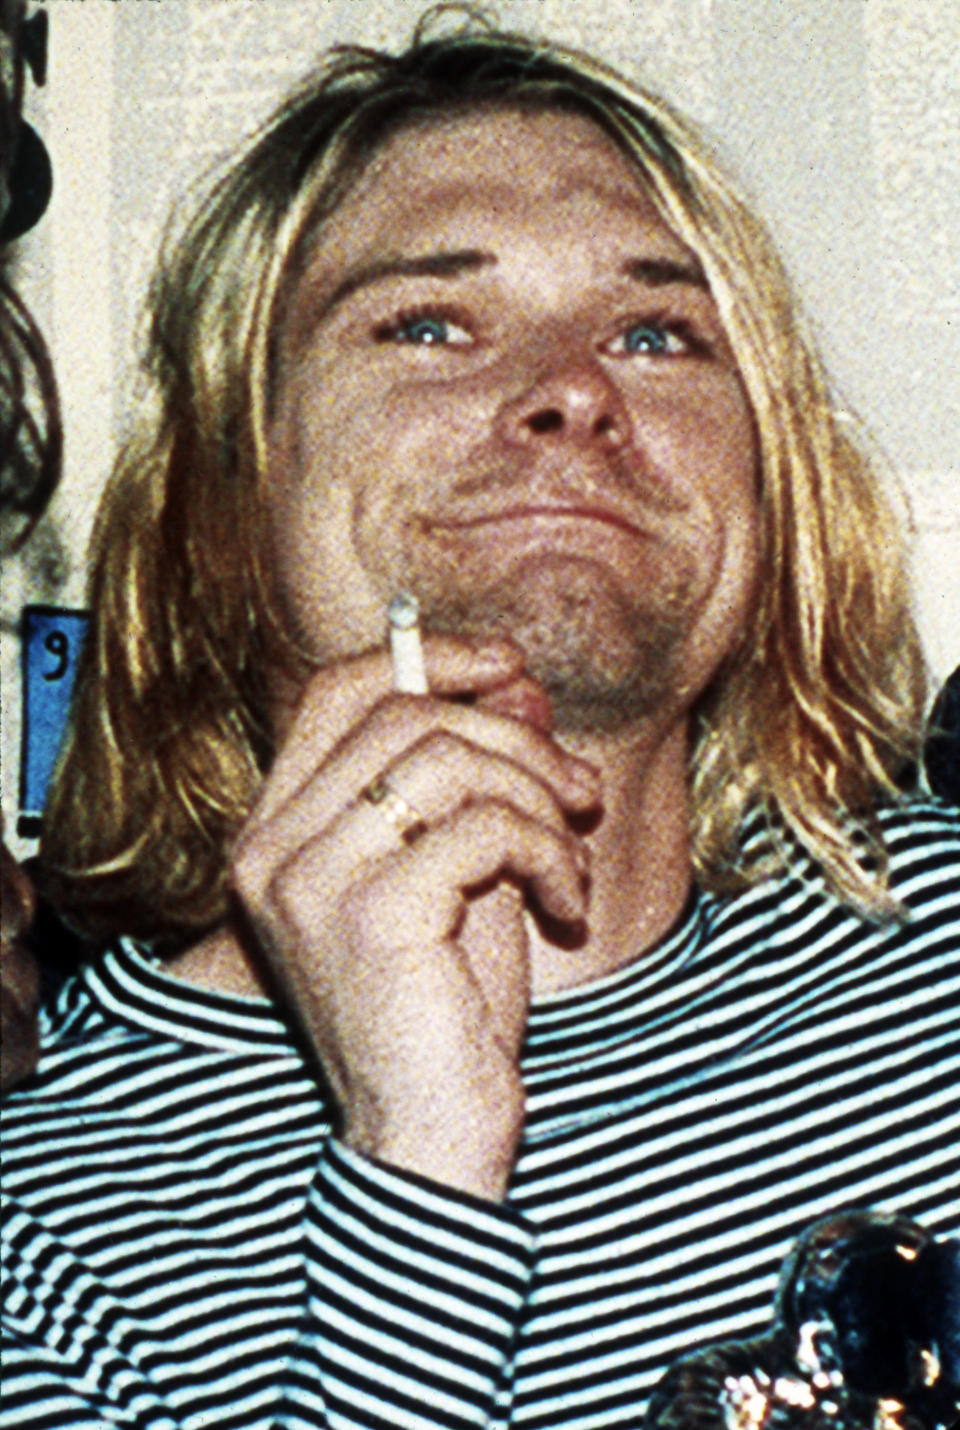 Back in 1995, Neil Young credited the late Kurt Cobain for inspiring him to renew his dedication to making music again during his Rock and Roll Hall of Fame induction speech. 